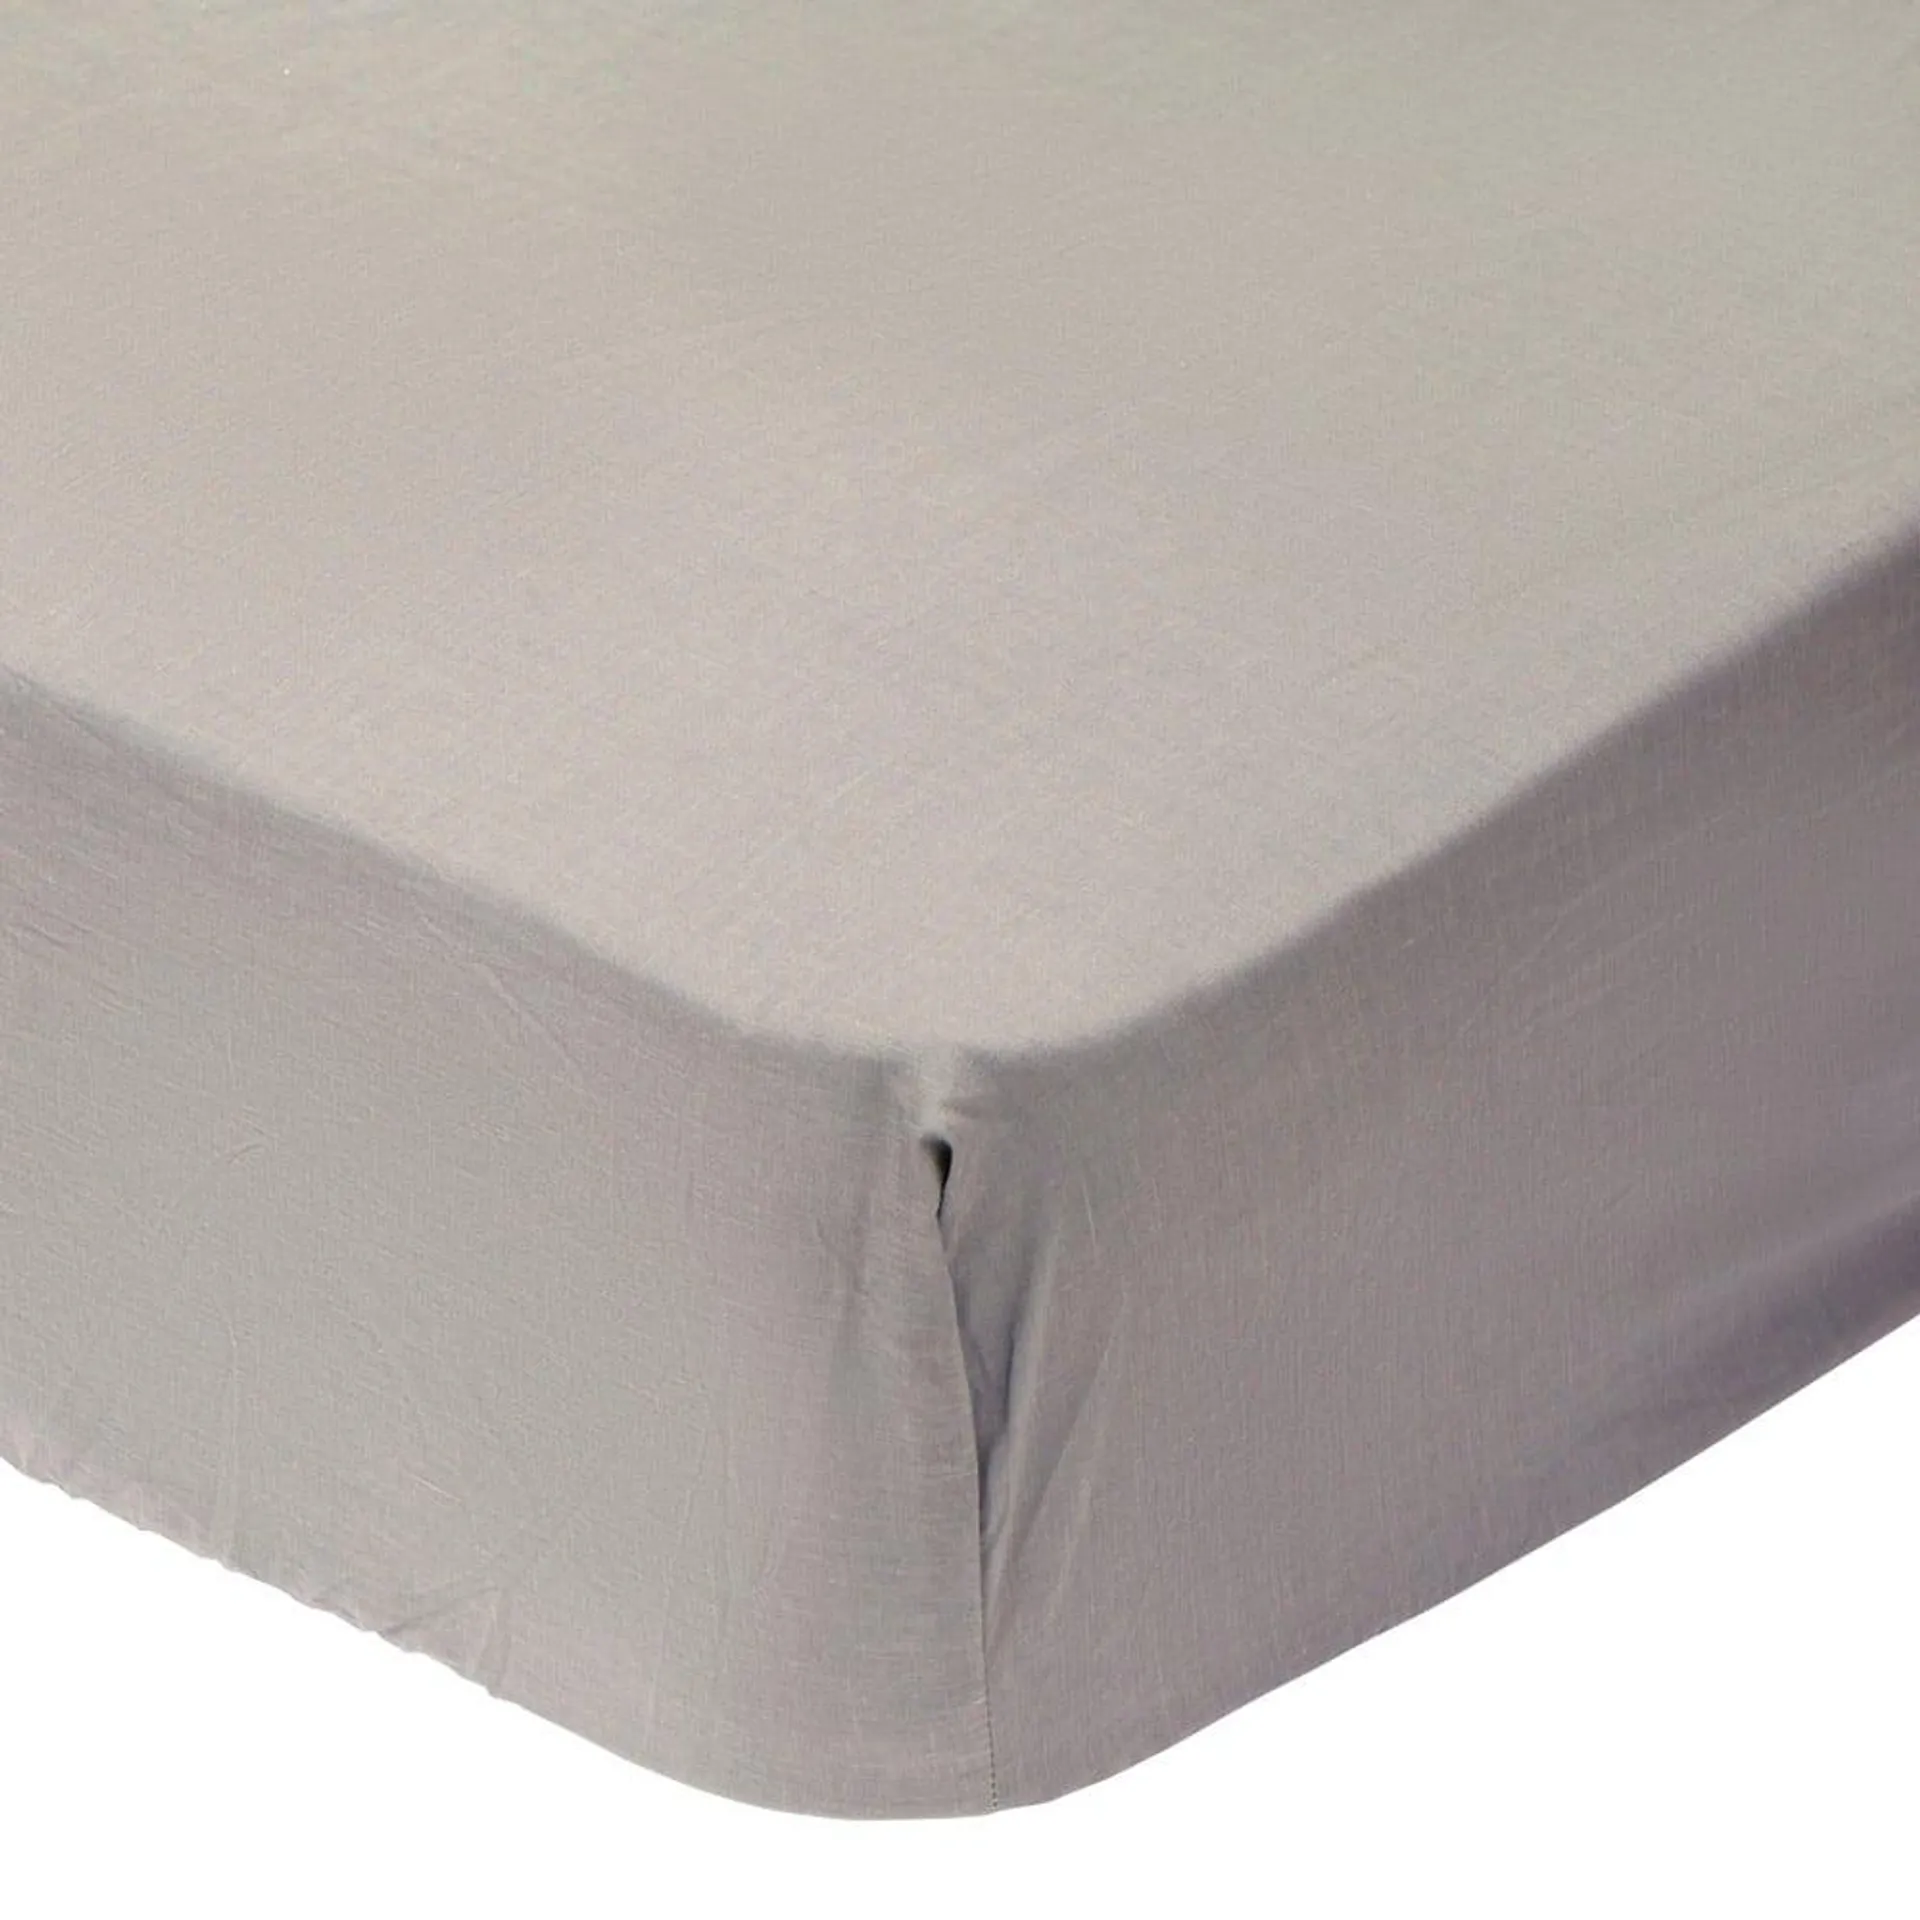 Wilko Best Super King Porpoise 300 Thread Count Percale Fitted Bed Sheet